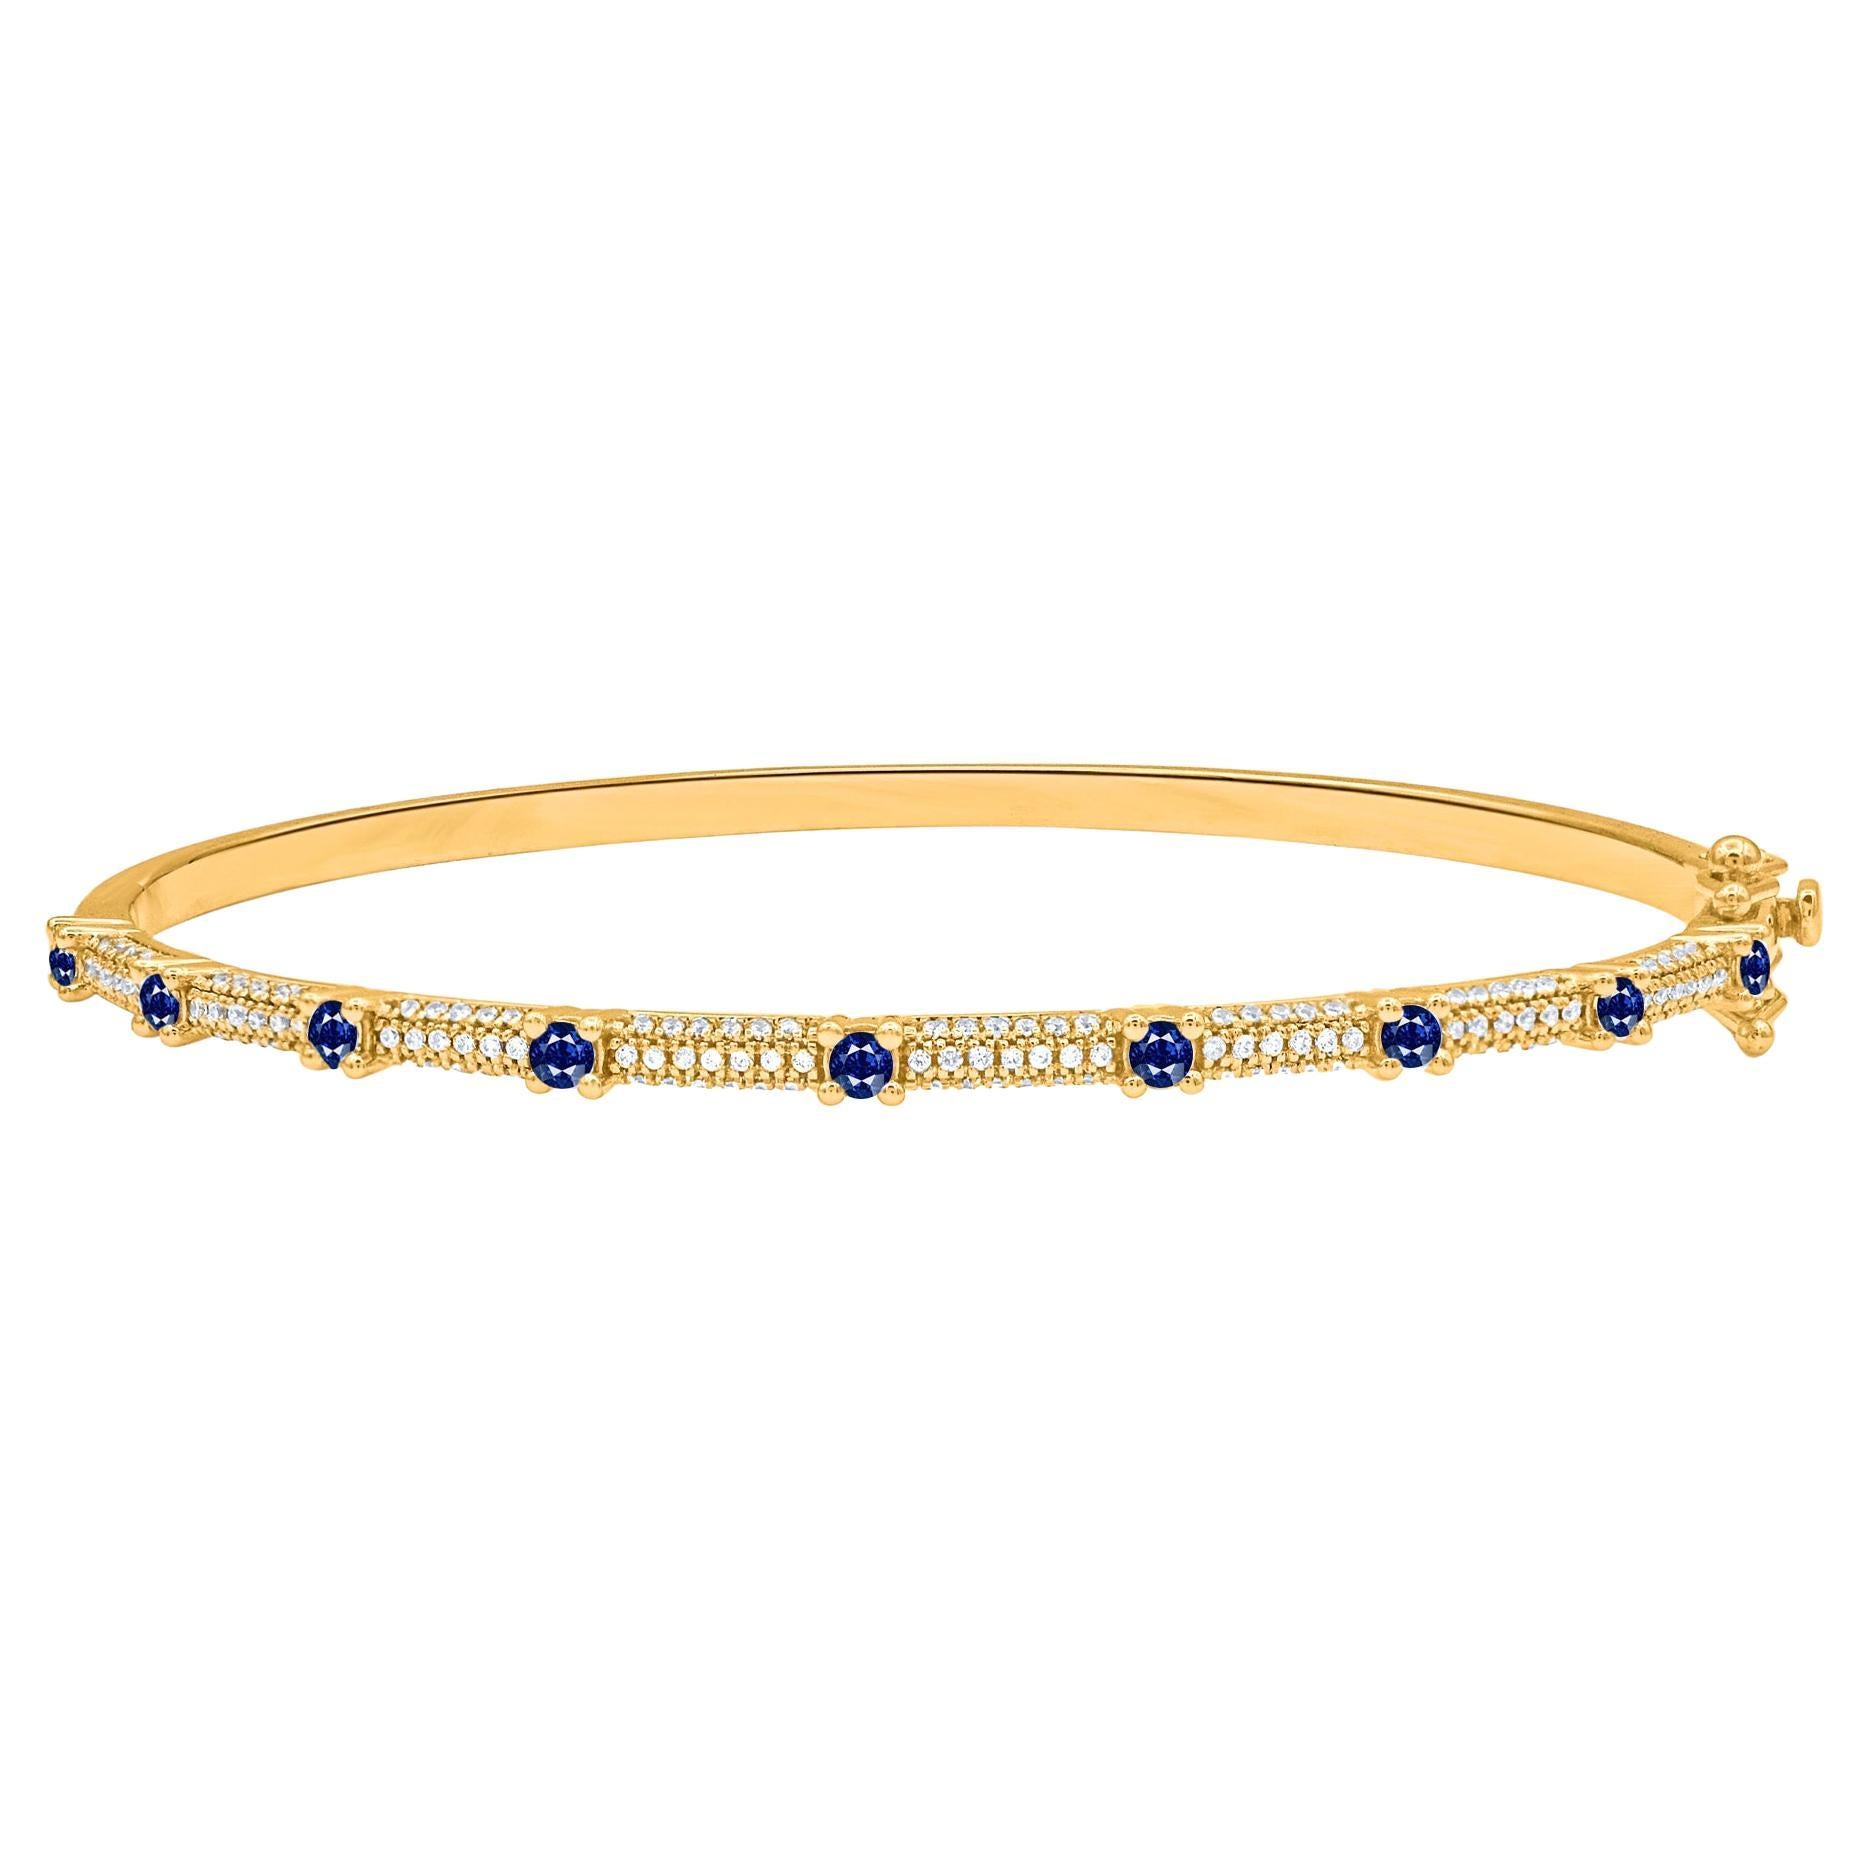 TJD 1.0 Ct Natural Diamond and Blue Sapphire Bangle Bracelet in 18KT Yellow Gold